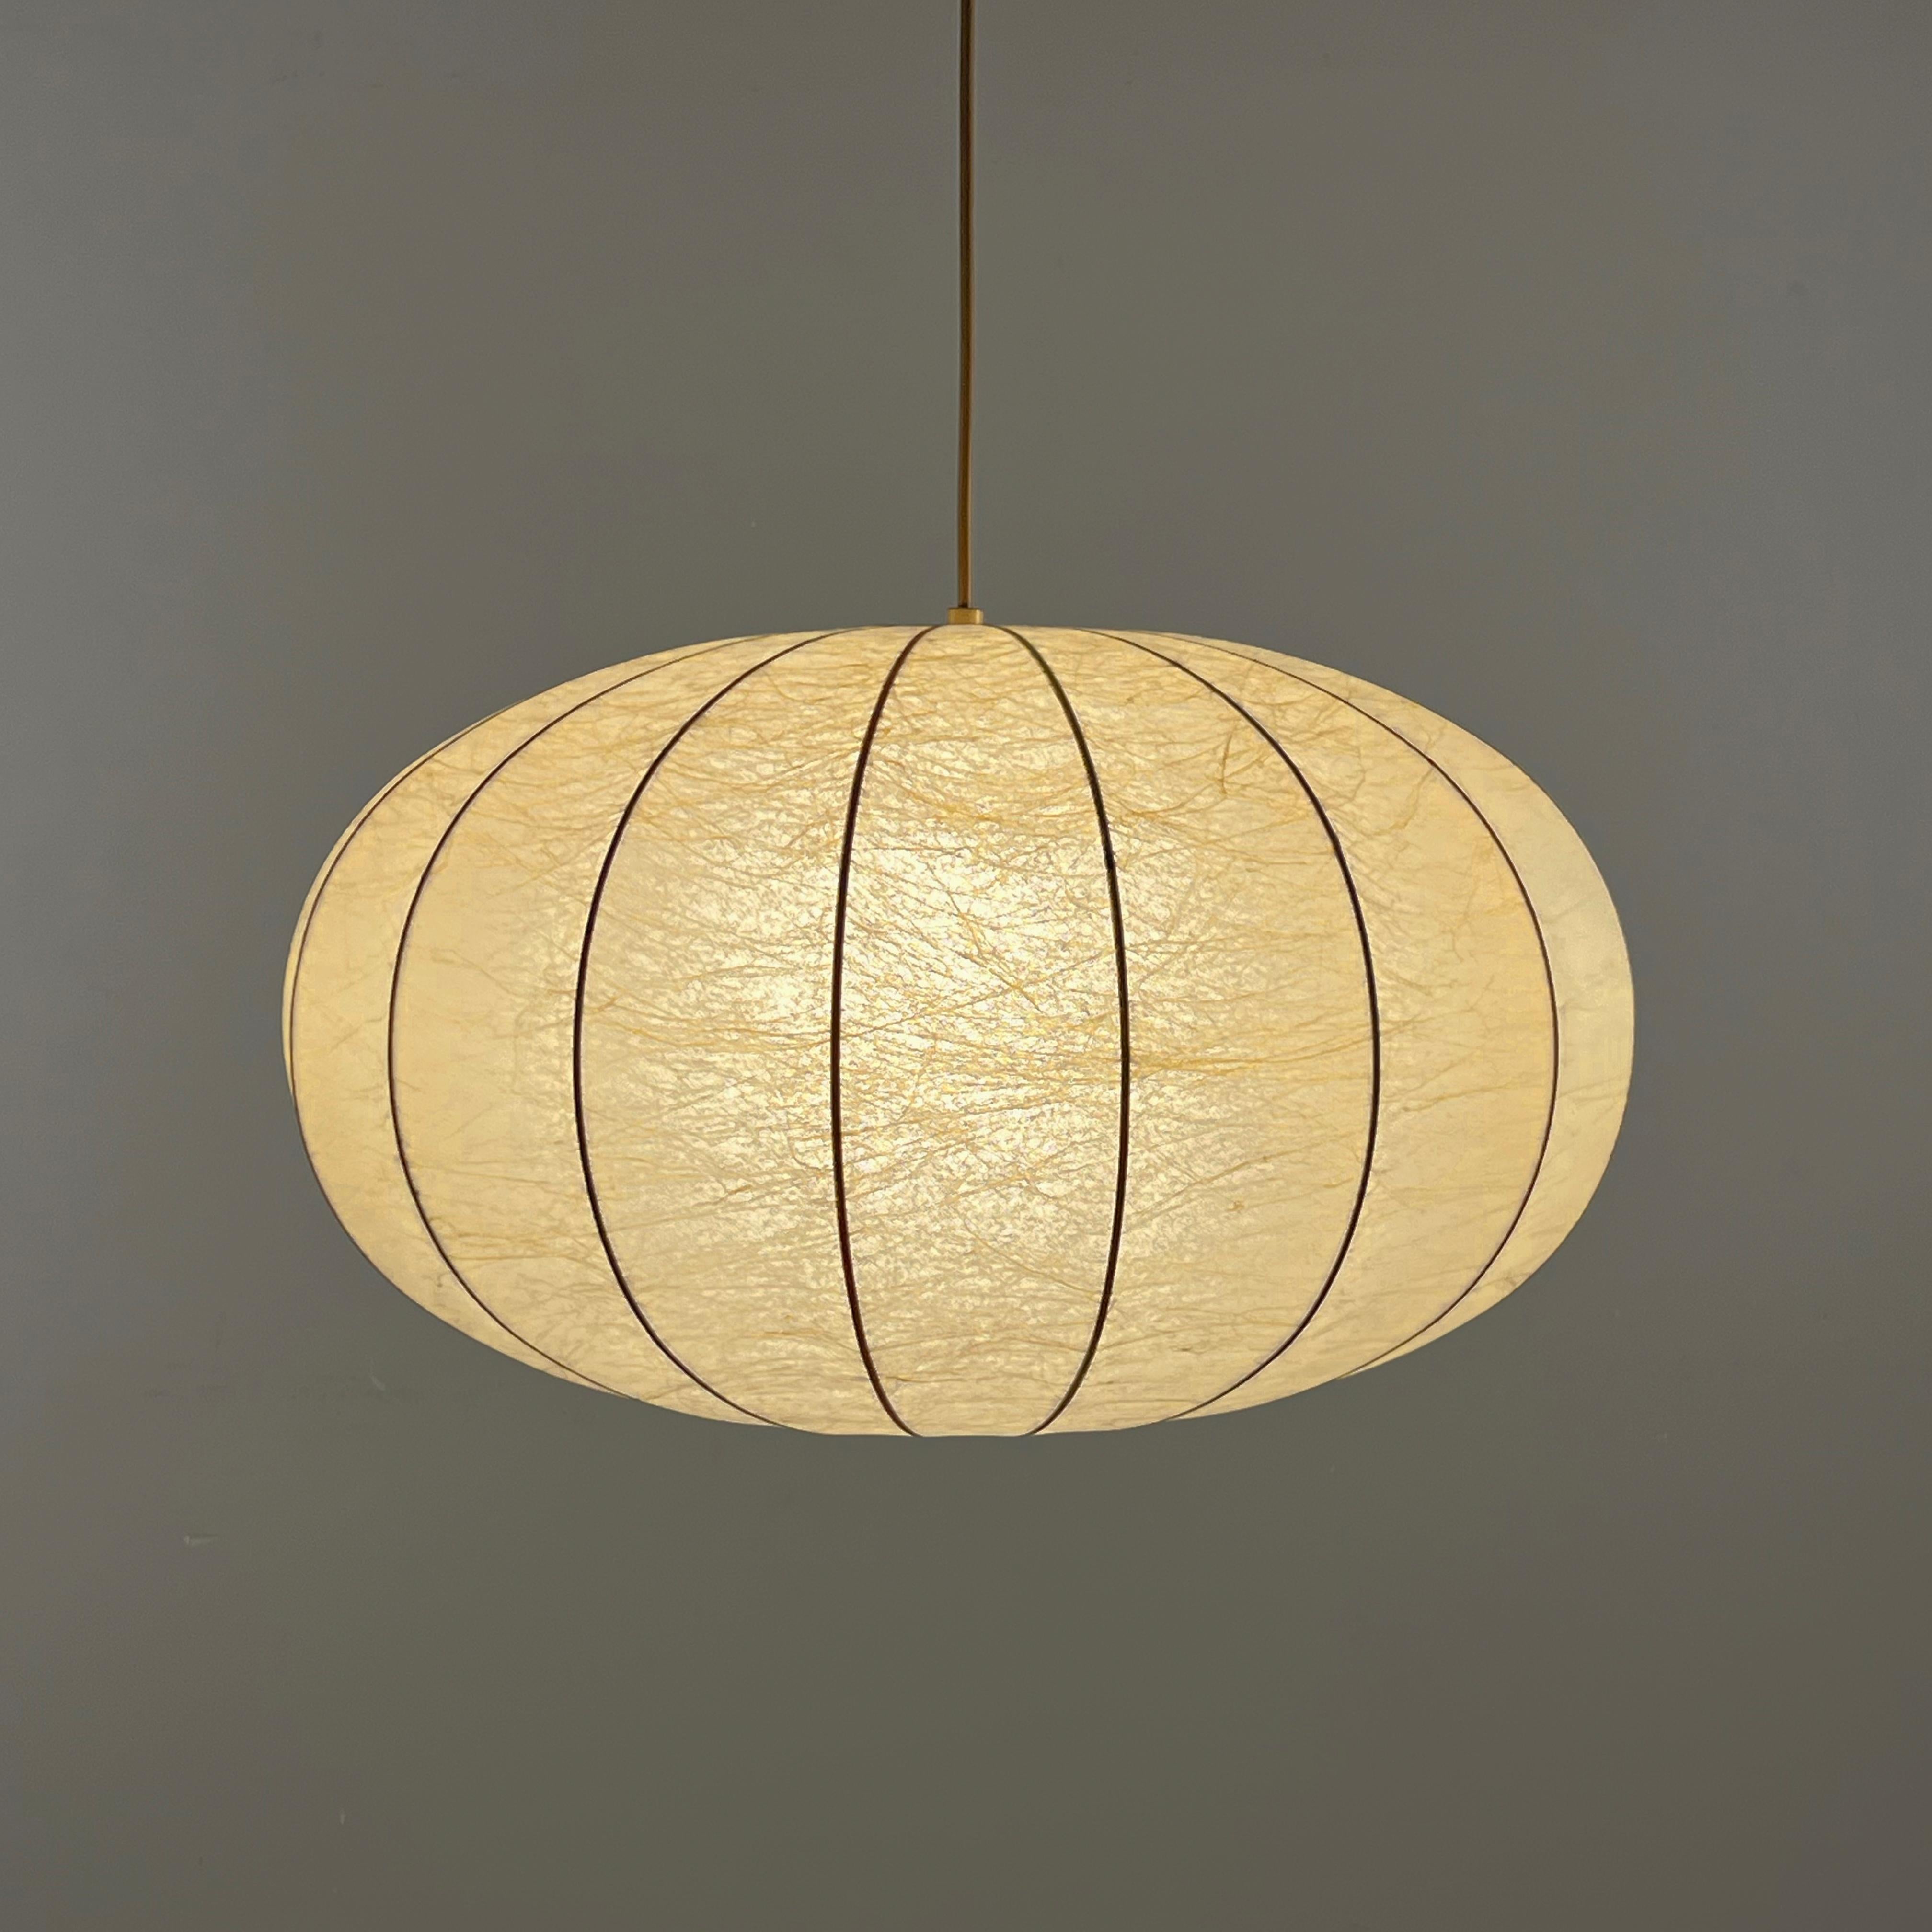 German 21.6 Inches Space Age Cocoon Pendant Lamp by Friedel Wauer for Goldkant Leuchten